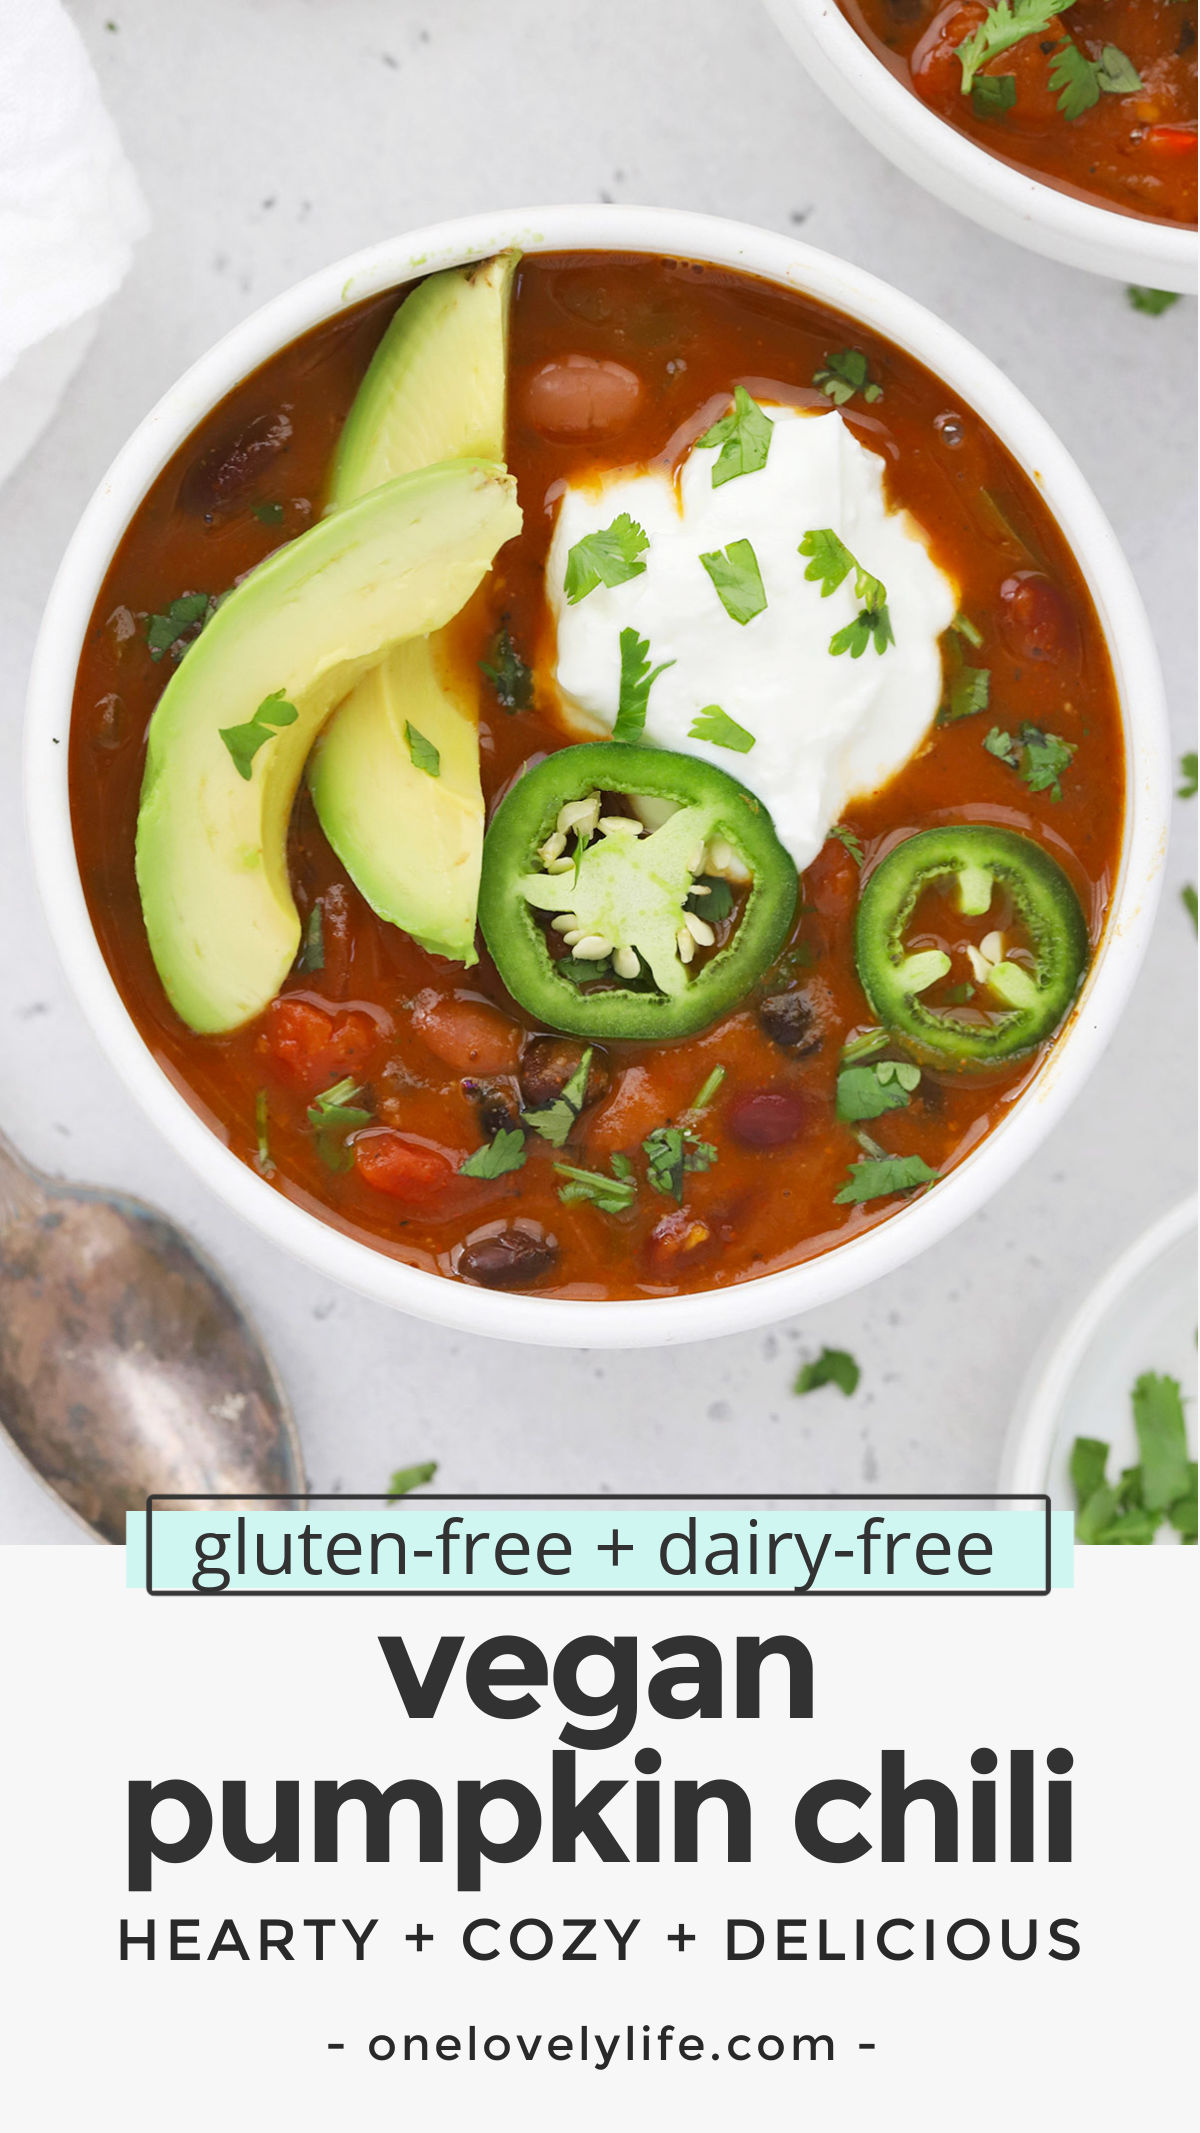 Vegetarian Pumpkin Chili - This cozy vegetarian chili recipe is perfect for cold weather and rainy days. You'll love the flavors! (Gluten-Free, Vegan) // Vegan pumpkin chili recipe // vegan chili recipe // vegetarian dinner // vegetarian lunch // healthy lunch // healthy dinner // chili cookoff recipe #chili #pumpkin #vegetarian #vegan #glutenfree #healthydinner #healthylunch